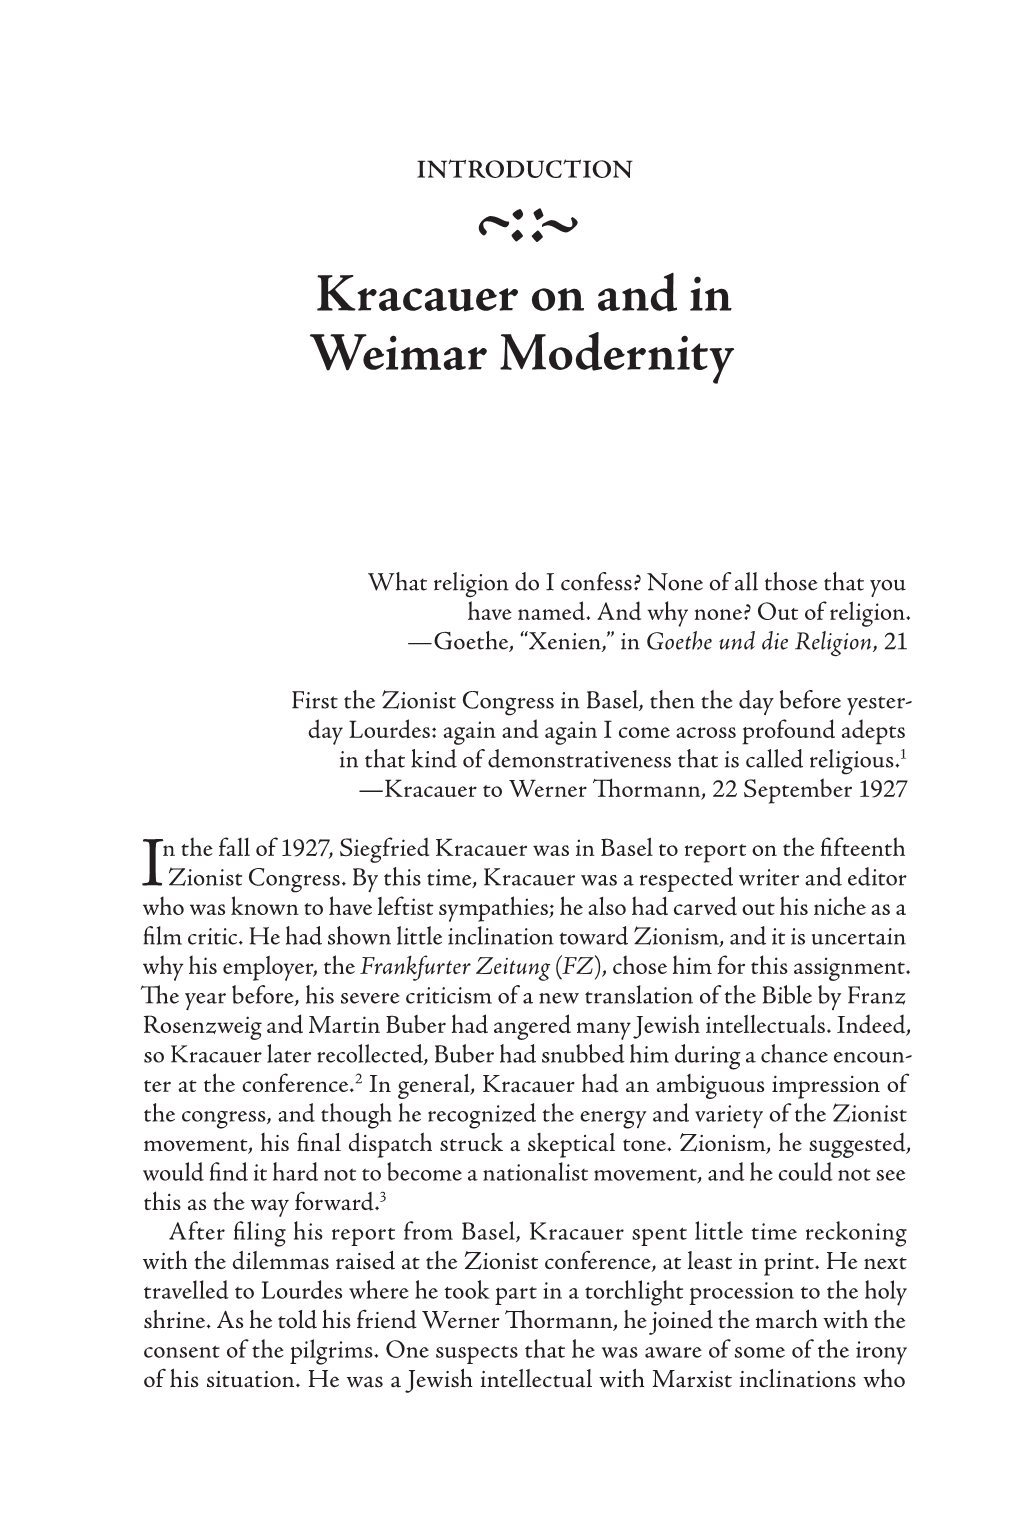 Kracauer on and in Weimar Modernity